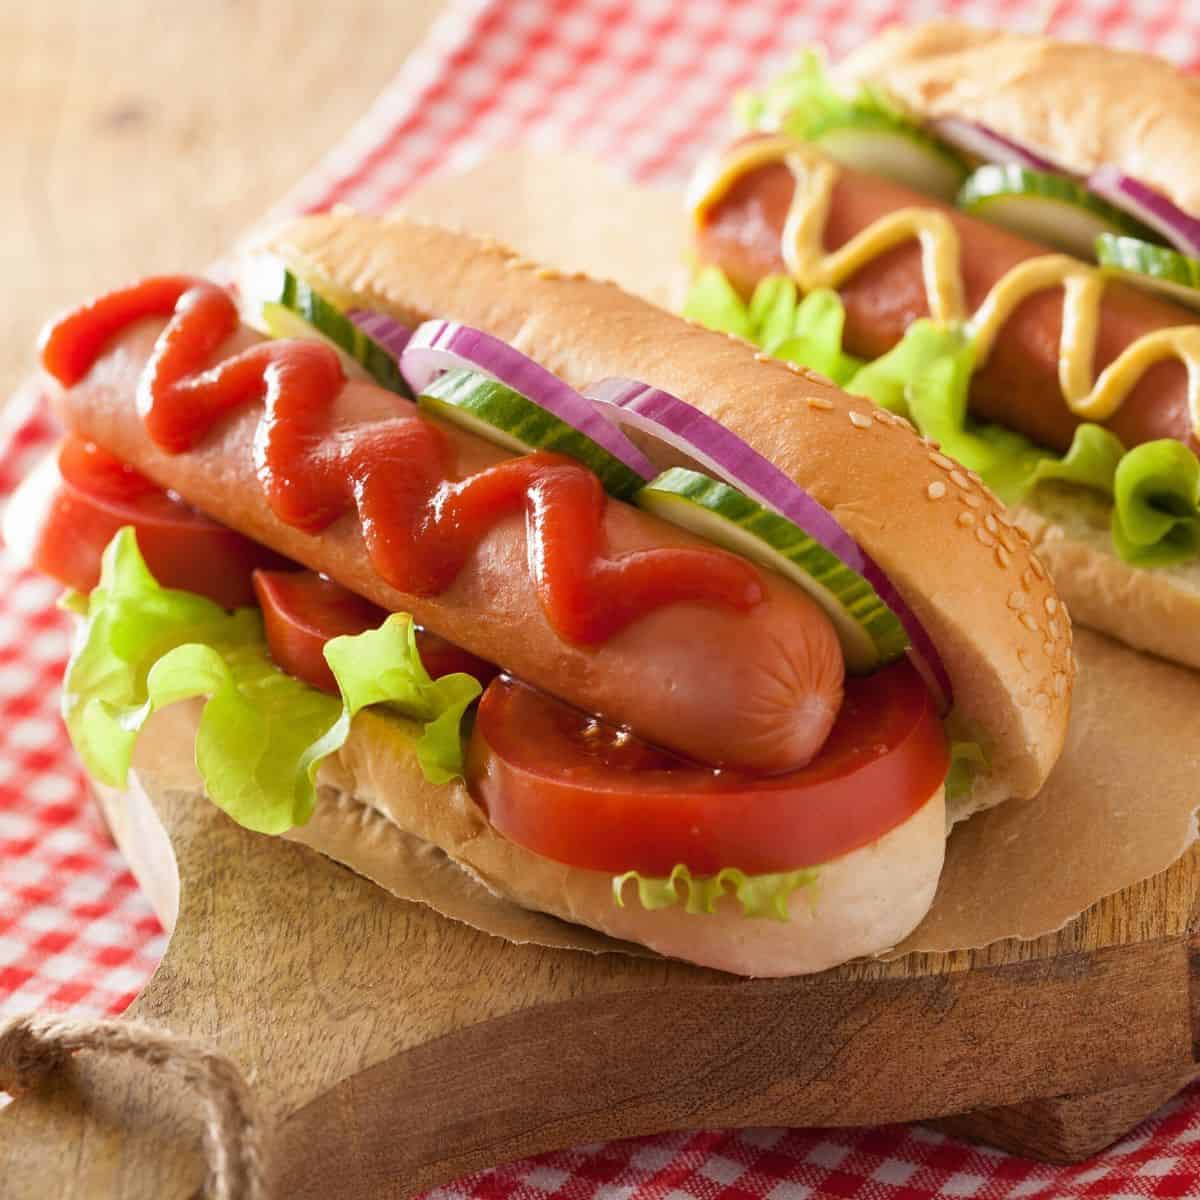 How to Microwave Hot Dogs That Taste Good